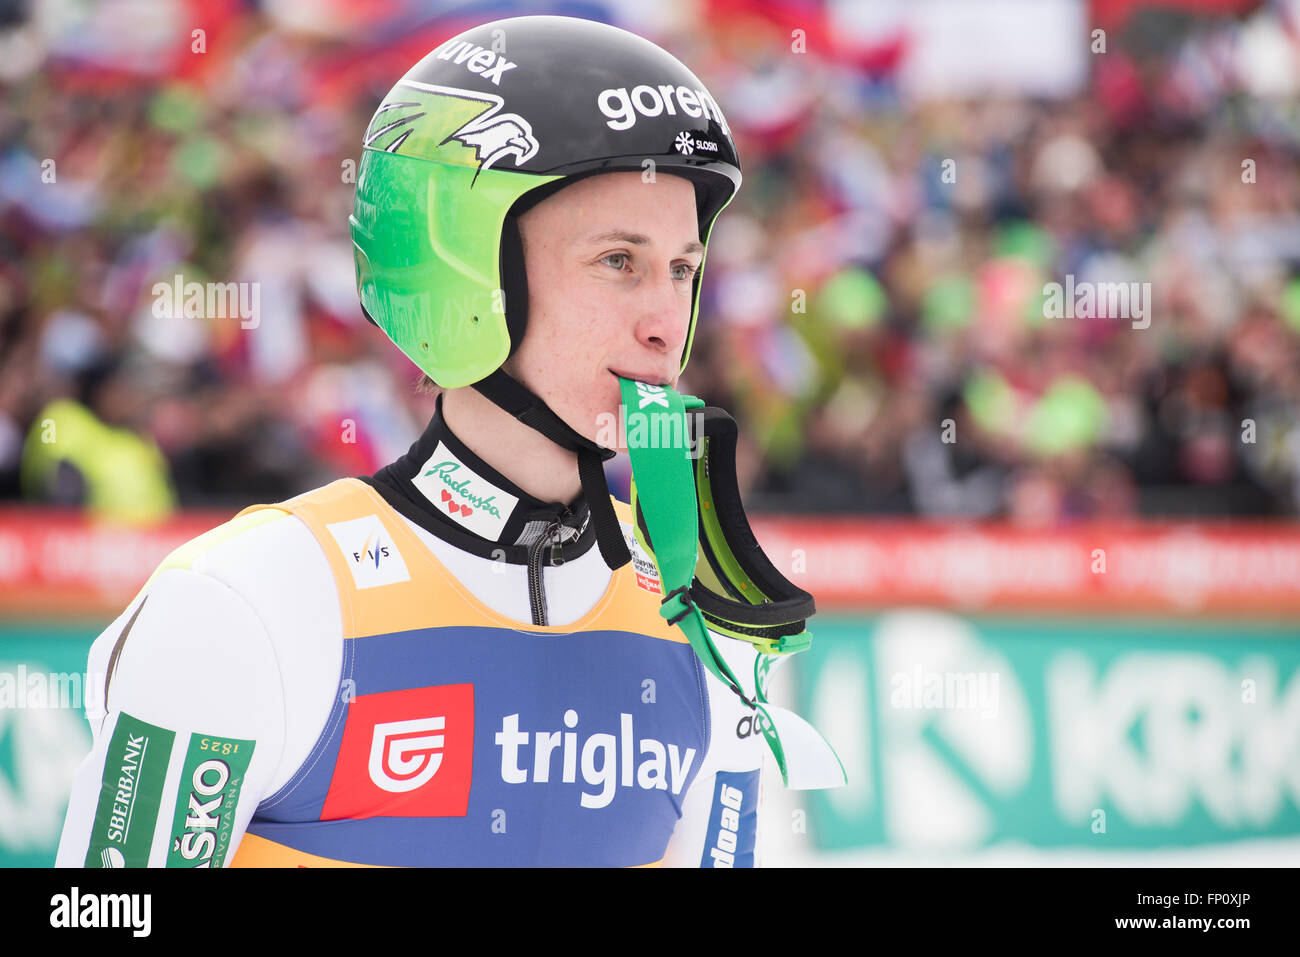 Planica, Slovenia. 17th Mar, 2016. Peter Prevc of Slovenia celebrating his first place at the Planica FIS Ski Jumping World Cup final on the March 17, 2016 in Planica, Slovenia. © Rok Rakun/Pacific Press/Alamy Live News Stock Photo